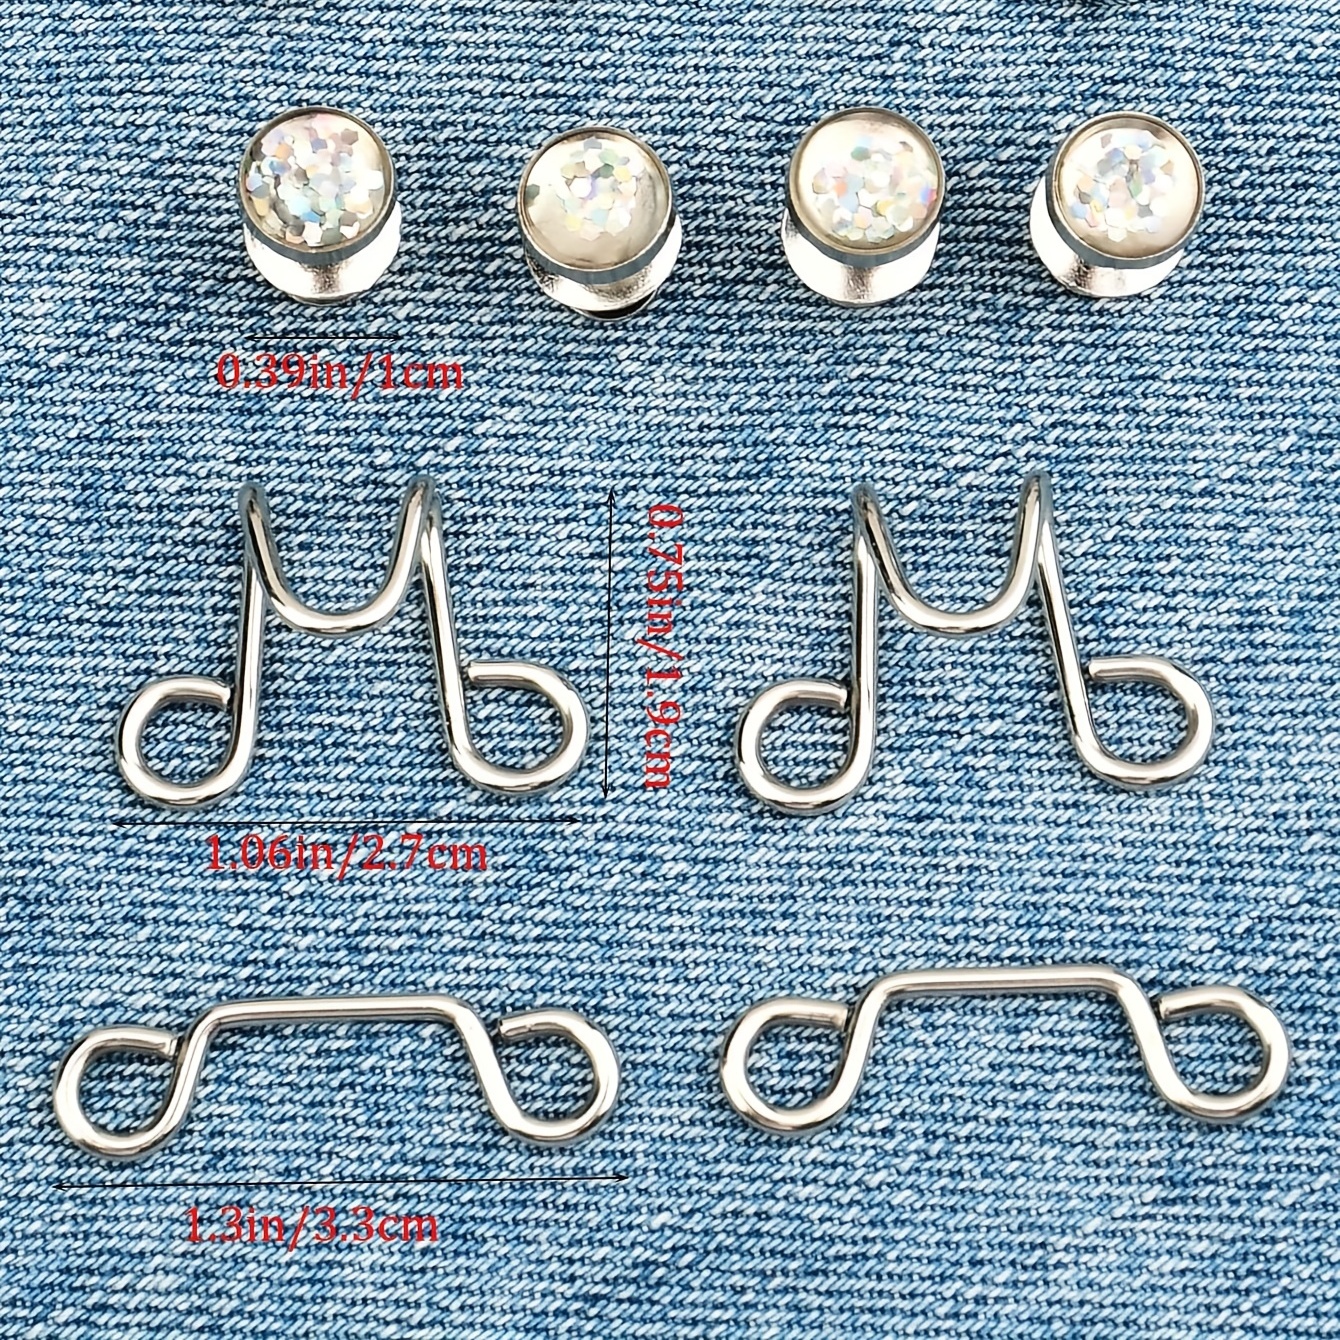 1 Set Of Pant Waist Tightener Instant Jean Buttons For Loose Jeans Pants  Clips For Waist Detachable Jean Buttons Pins No Sewing Waistband